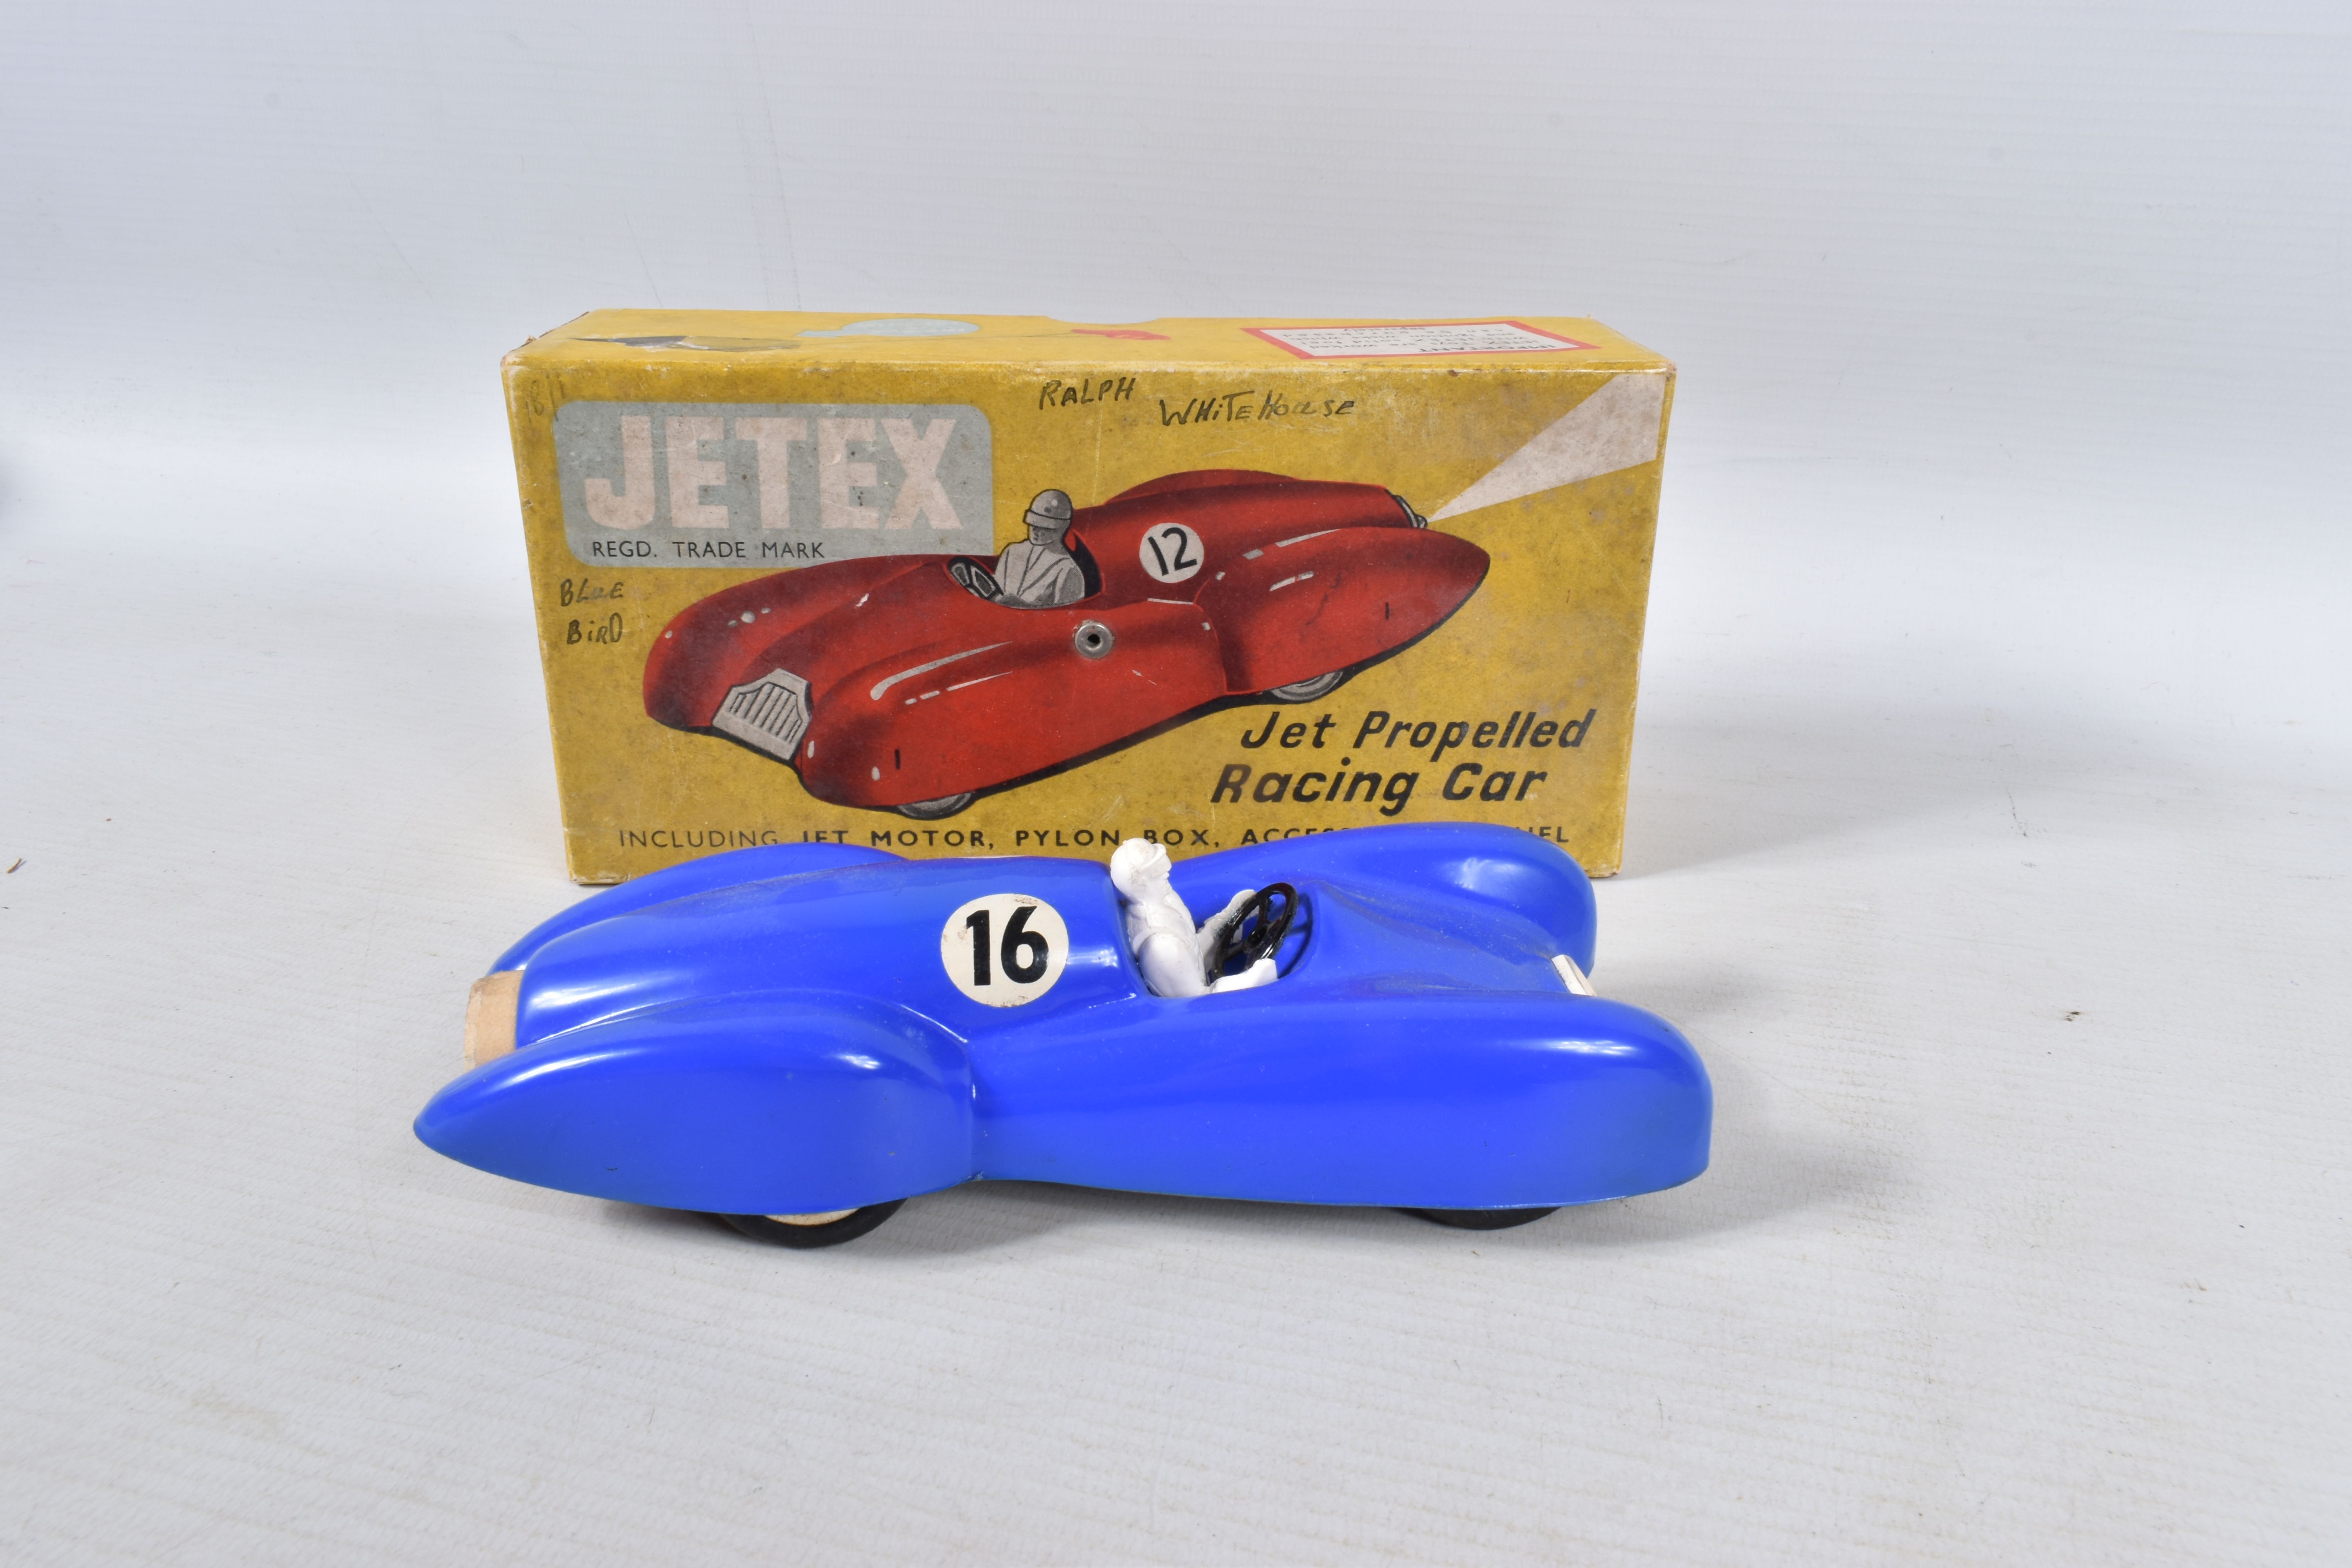 TWO BOXED JETEX RACING CARS, not tested, one in yellow/orange with RN13, the other blue with RN16, - Image 4 of 19